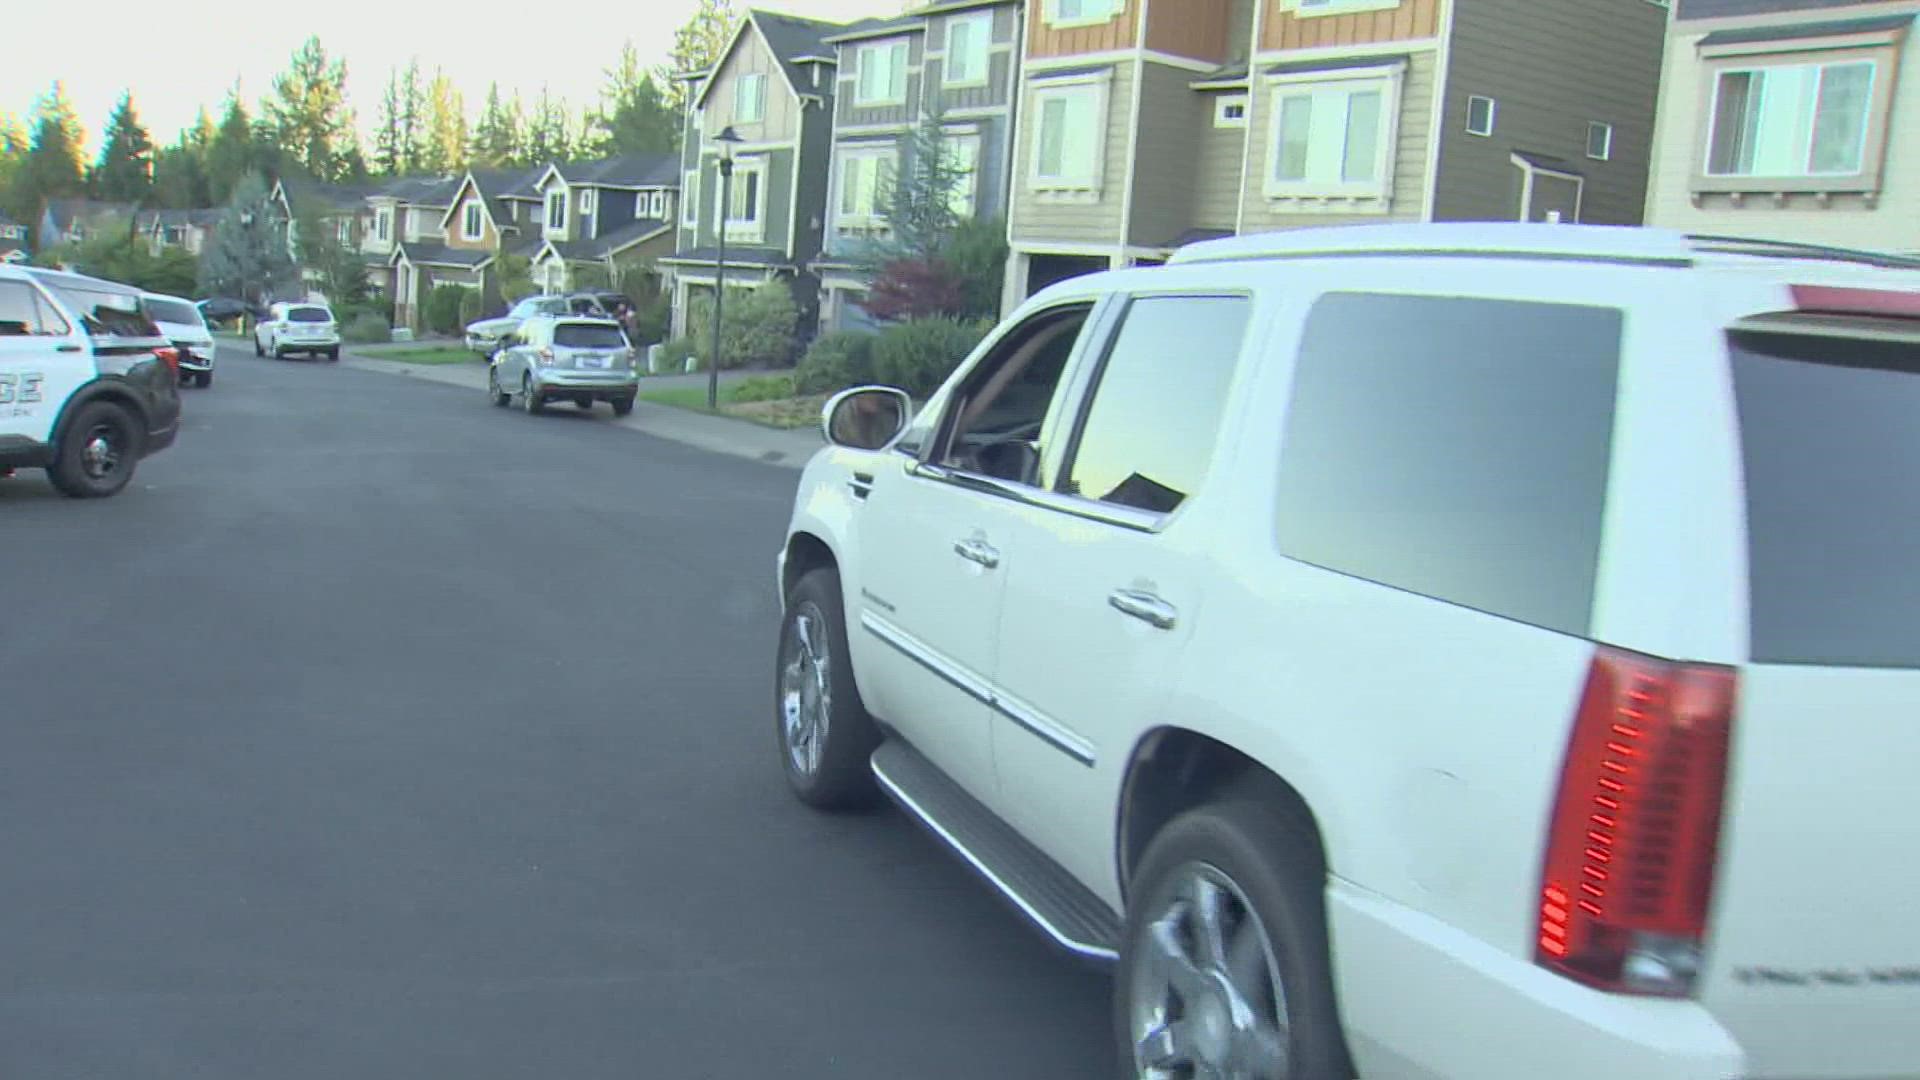 Vehicle thefts are on the rise in Washington state, which ranks 8th worst in the nation.